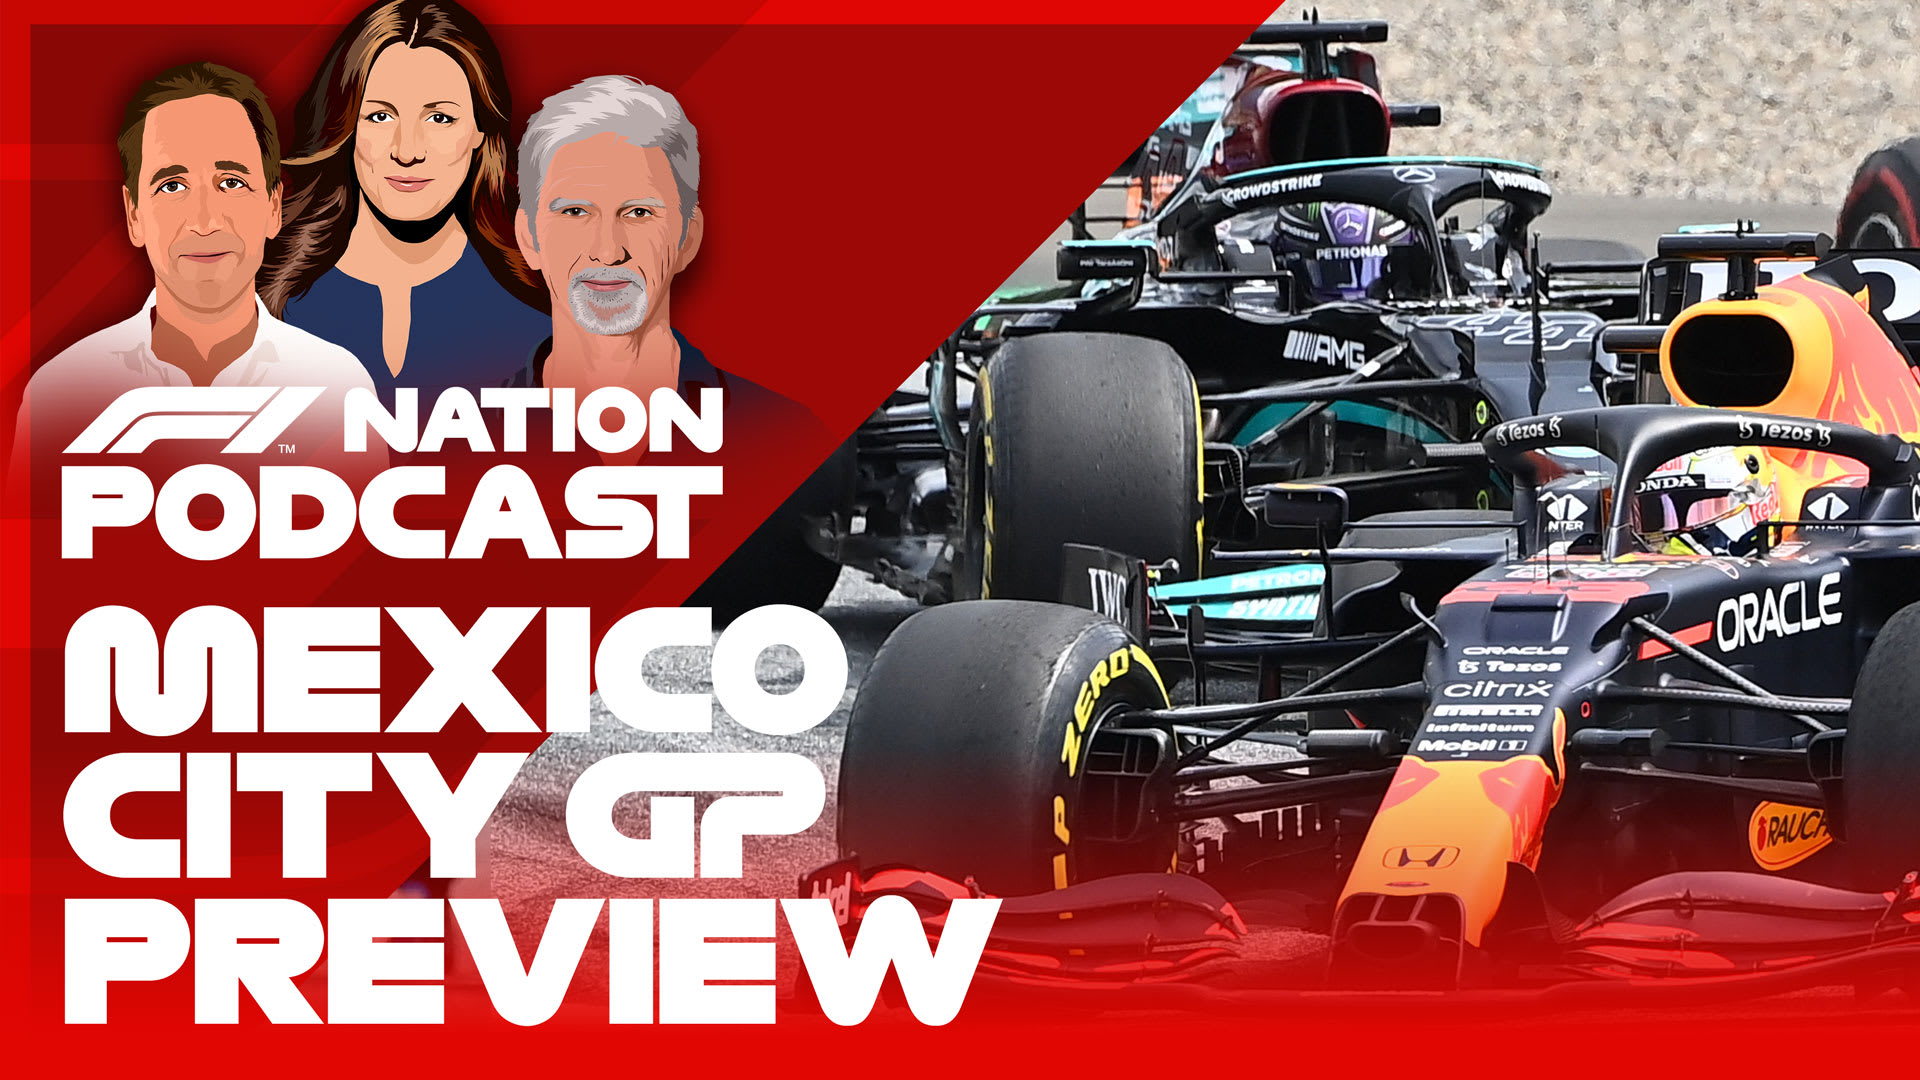 F1 NATION Rob Smedley joins the podcast crew to preview the Mexican Grand Prix Formula 1®